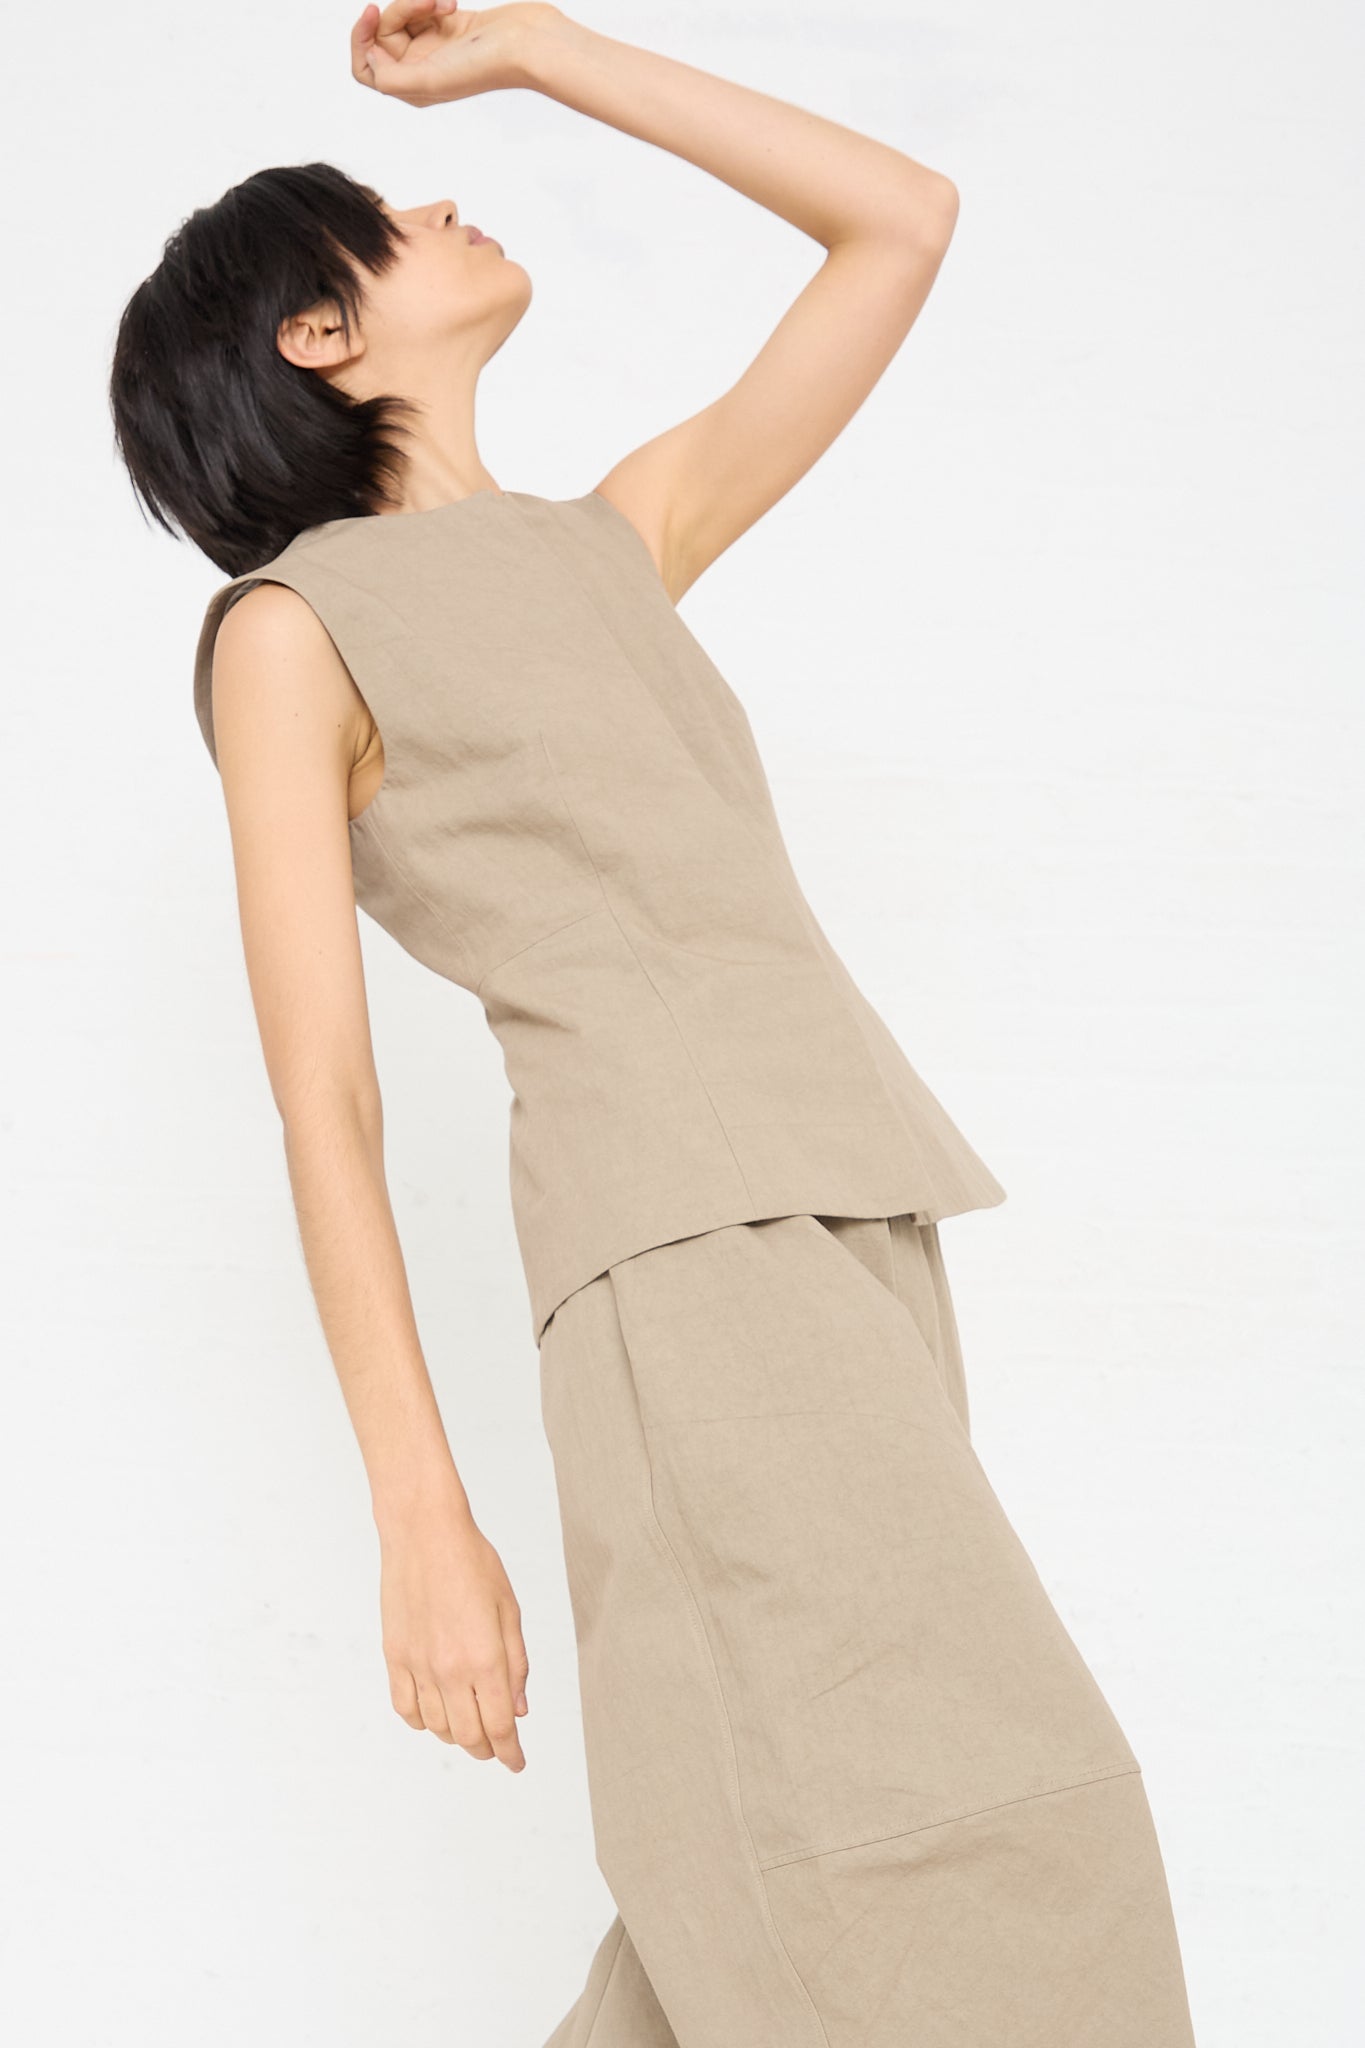 A woman wearing a Lauren Manoogian Structure Bodice in Drab Olive Brown) sleeveless top with matching pants. Profile view.